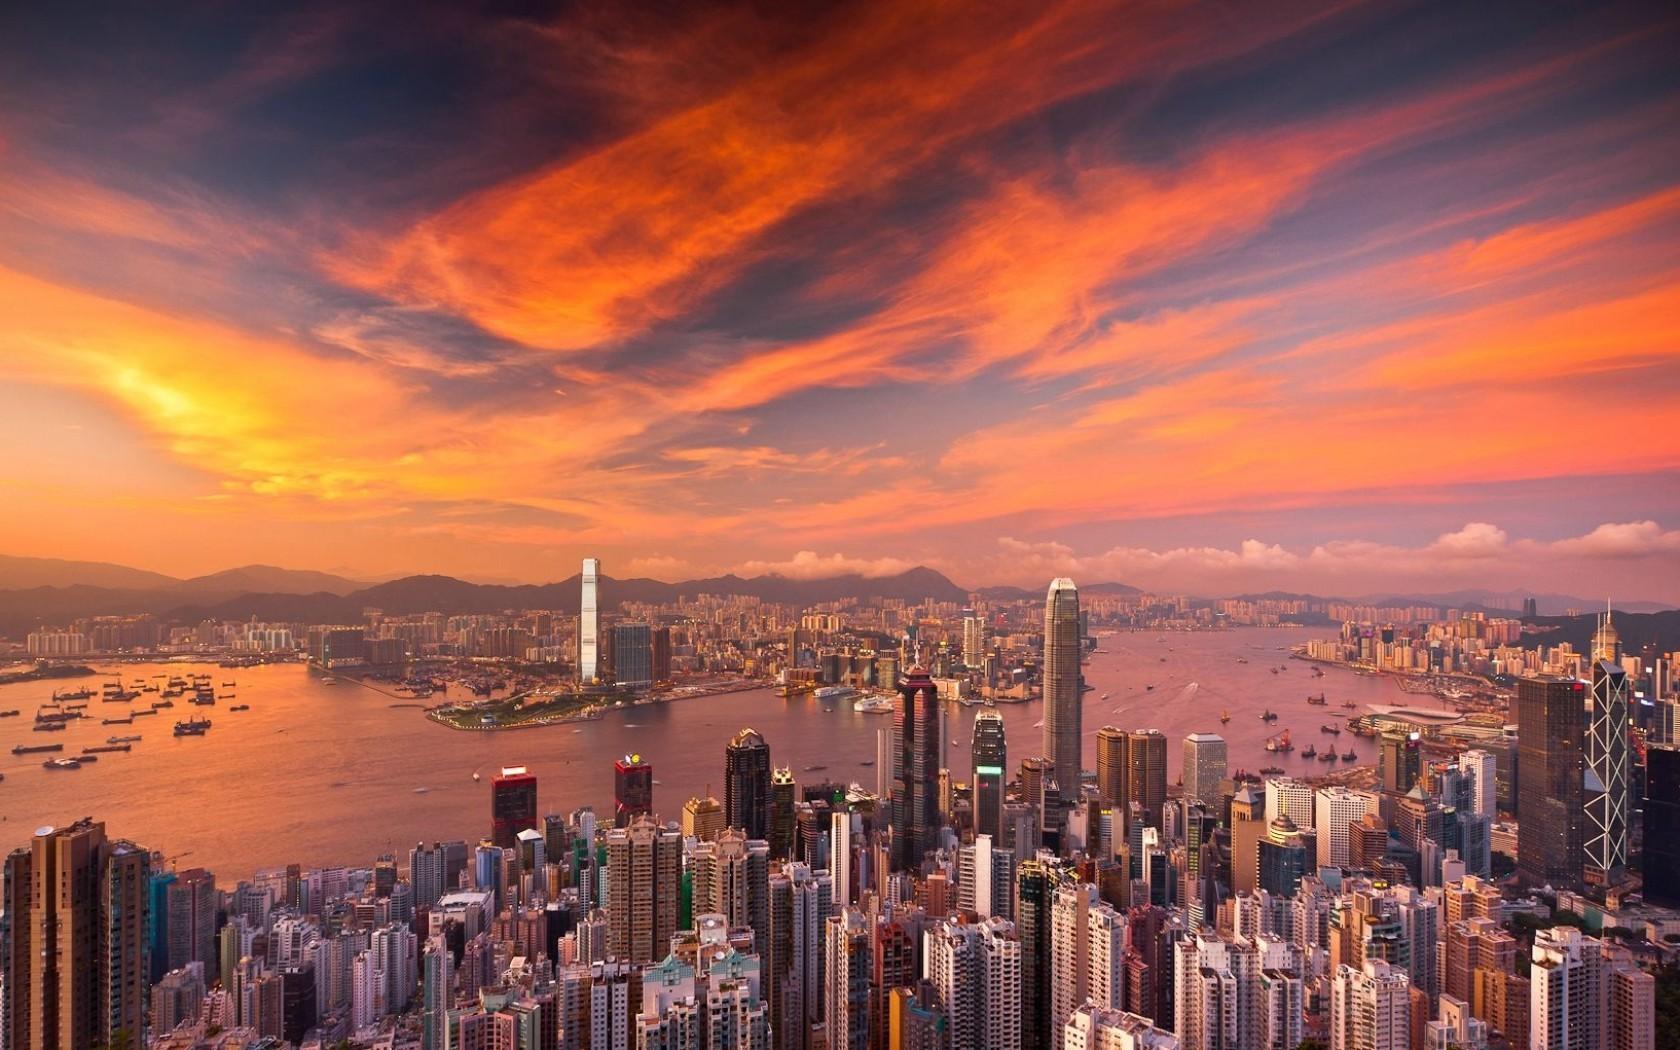 Download 1680x1050 Hong Kong Cityscape, Sunset, Skyscrapers, Clouds